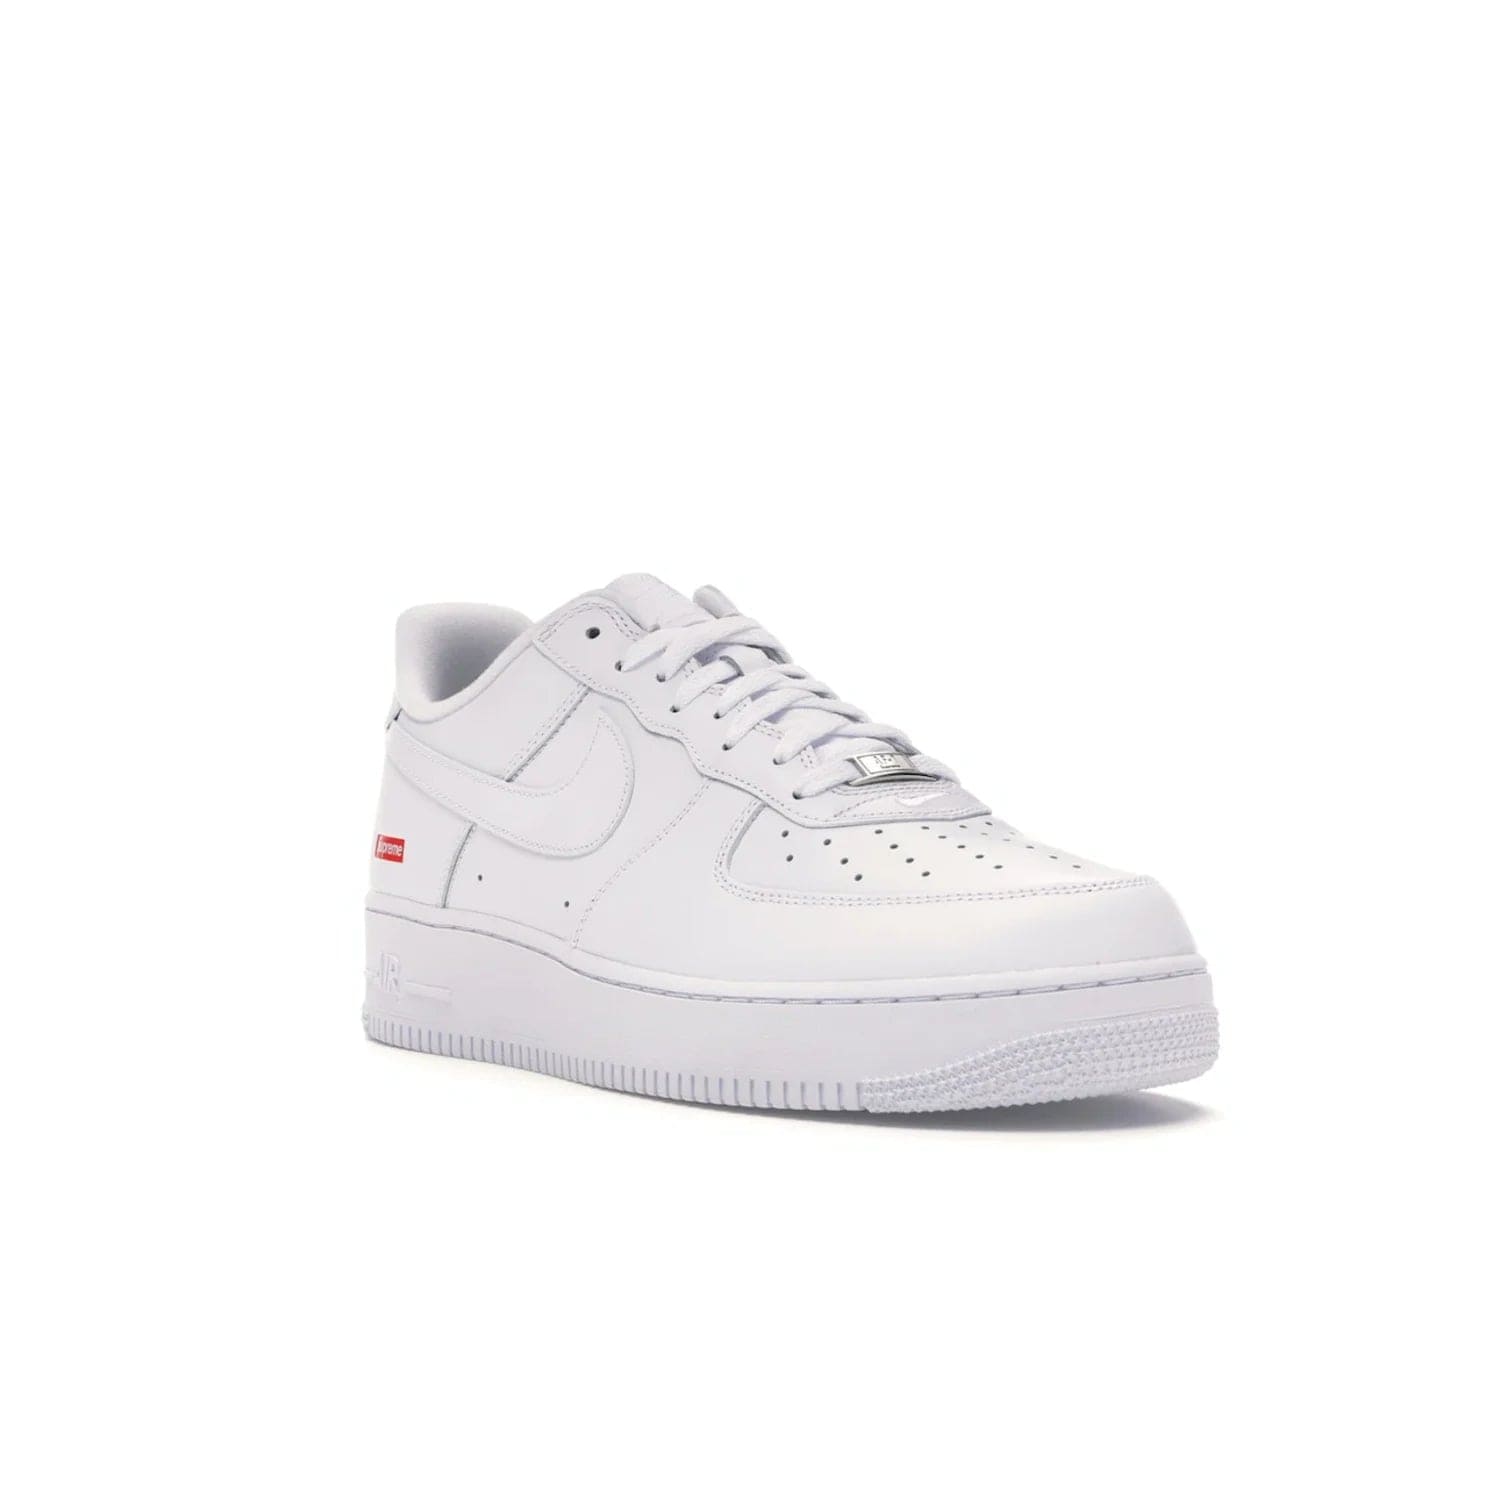 Nike Air Force 1 Low Supreme White - Image 6 - Only at www.BallersClubKickz.com - The Nike Air Force 1 Low Supreme White - a classic all-white design featuring premium leather and the iconic red Supreme Box Logo. Iconic sneakers embodying NYC style and culture. Released March 2020.